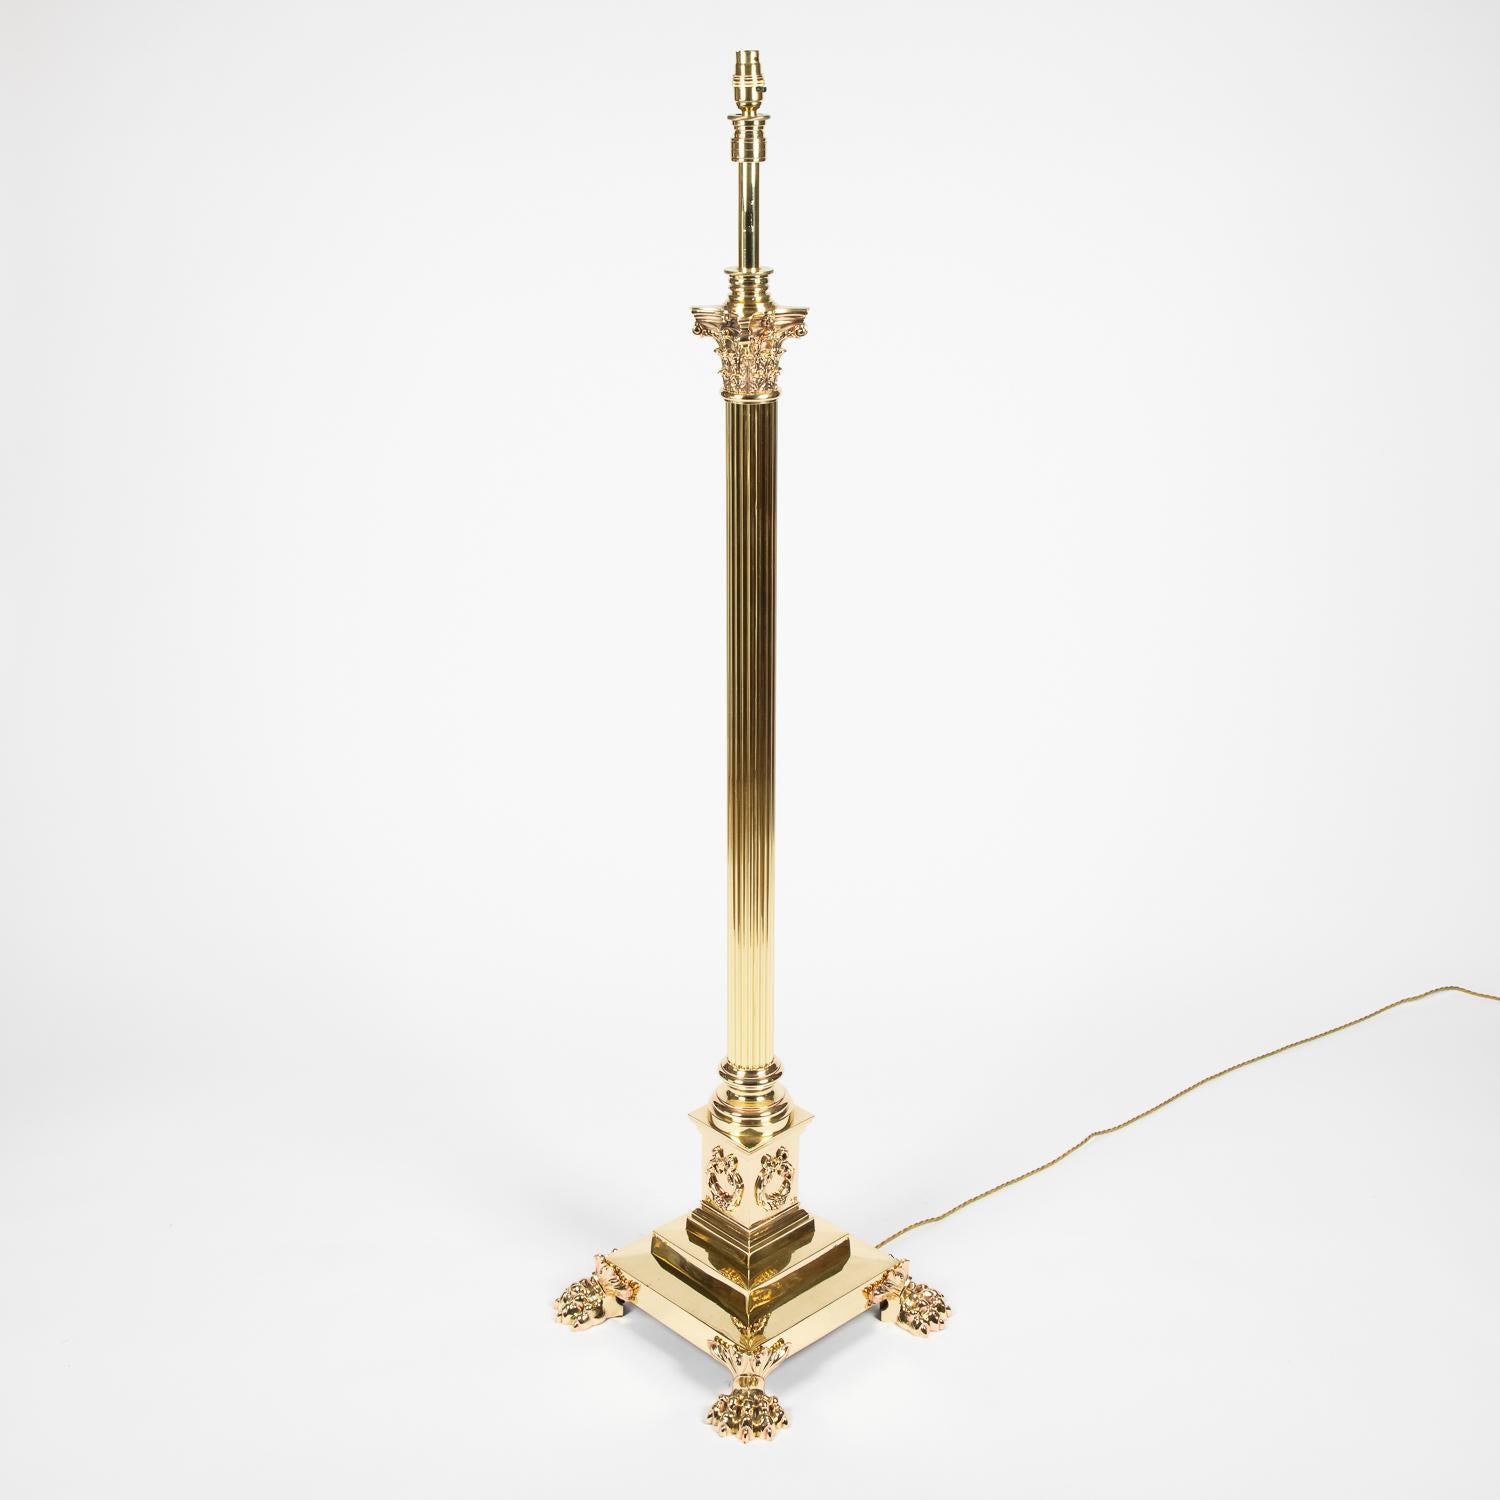 A telescopic brass Corinthian column standard lamp, Hinks pattern, circa 1890.

Adjustable height: The height in the photograph is : 5 foot. - 153 cm.

Rewired and tested. 

James Hinks & Son, Crystal Lamp Works, Great Hampton Street,